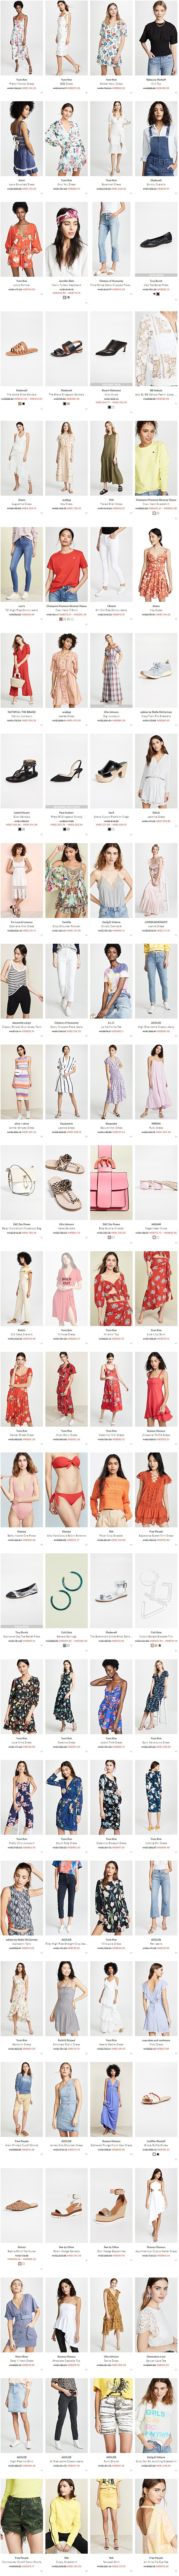 Shopbop: Final Sale - Up to 70% OFF 